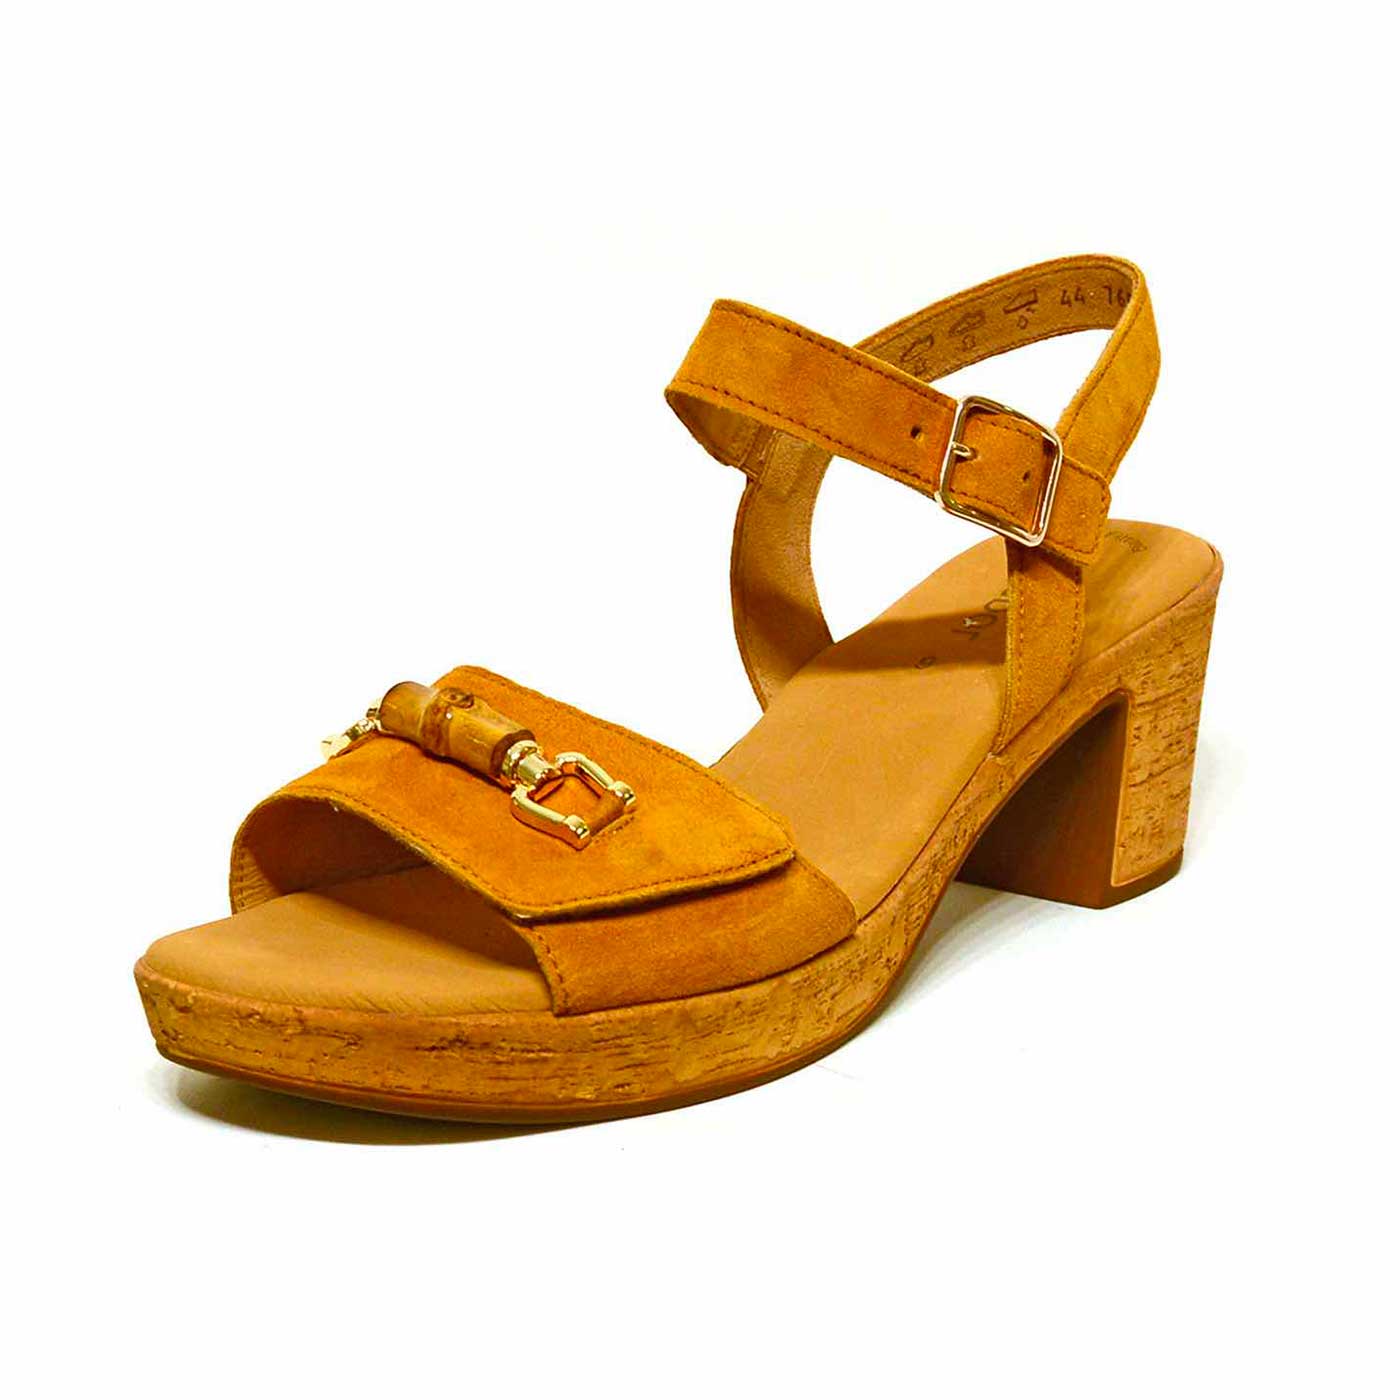 sandales velours camel, chaussures femme grande taille